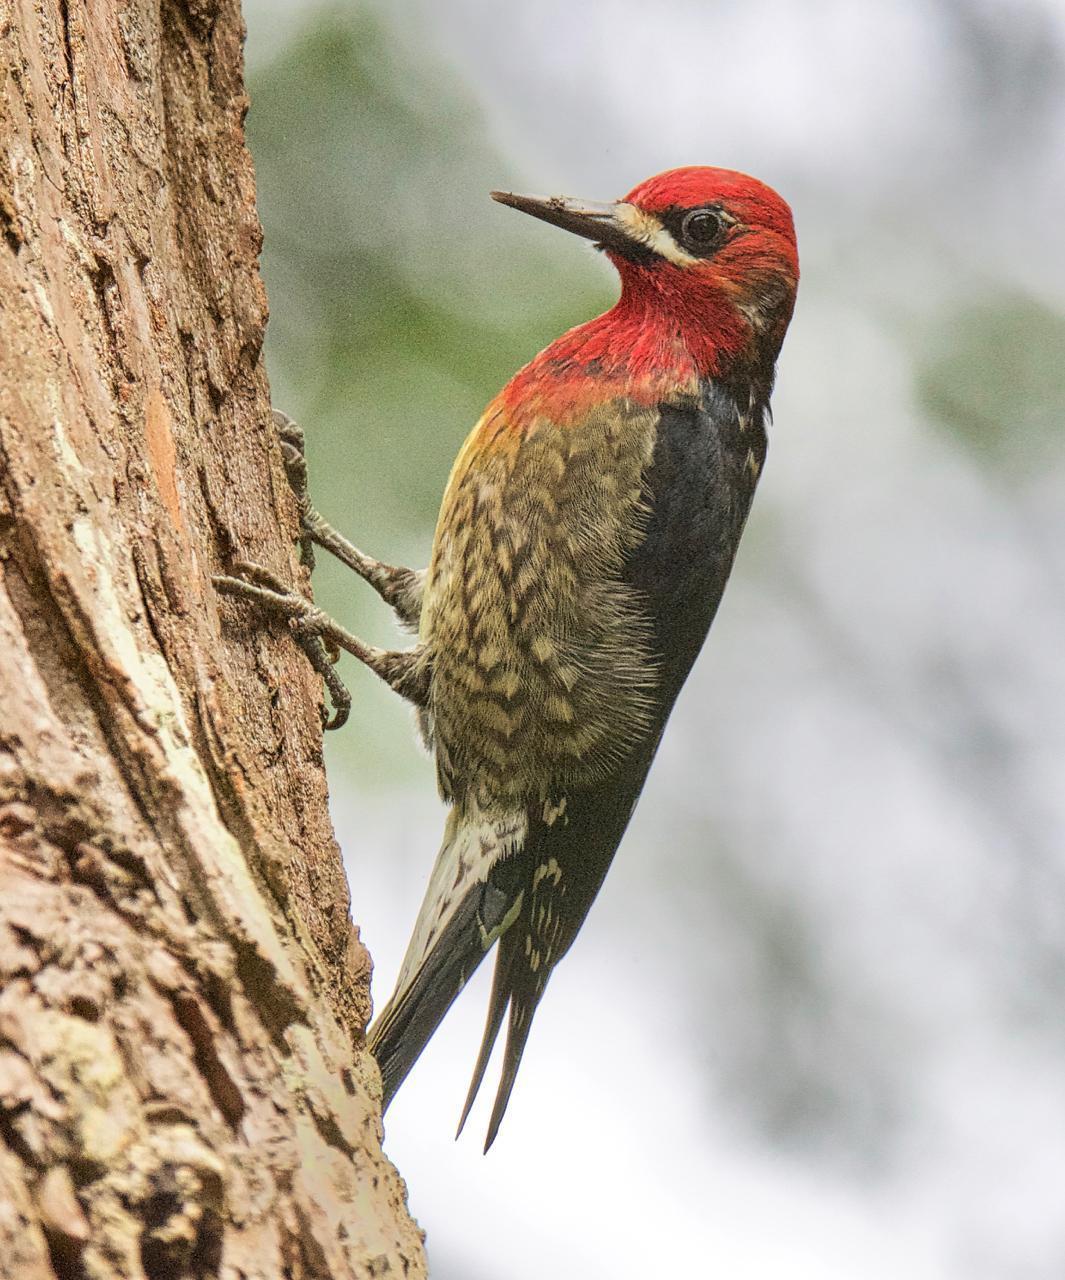 Red-breasted Sapsucker Photo by Brian Avent